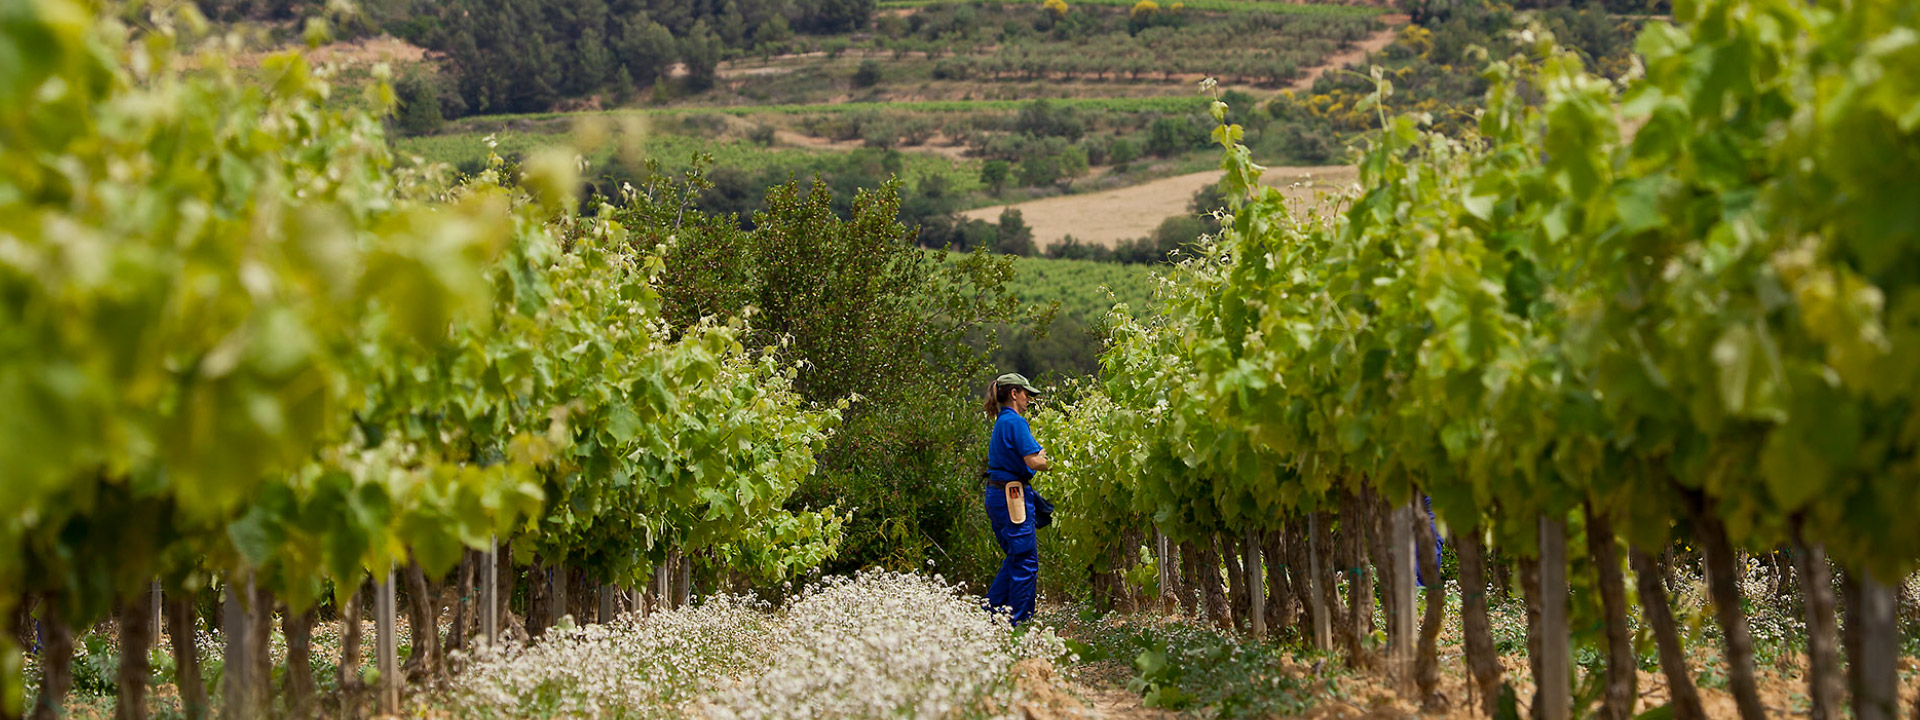 Grapevines with vineyards and mountains behind with a woman in a blue coverall picking grapes in the foreground.